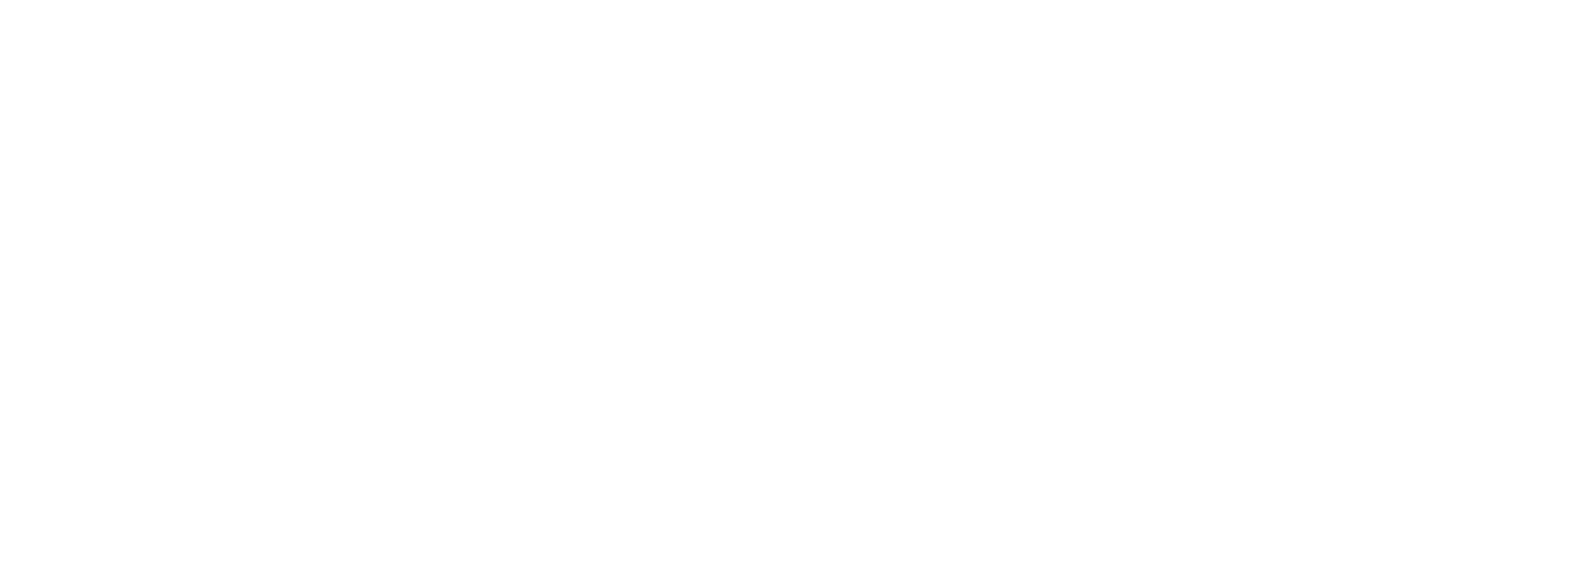 Echo Projects Green Corp